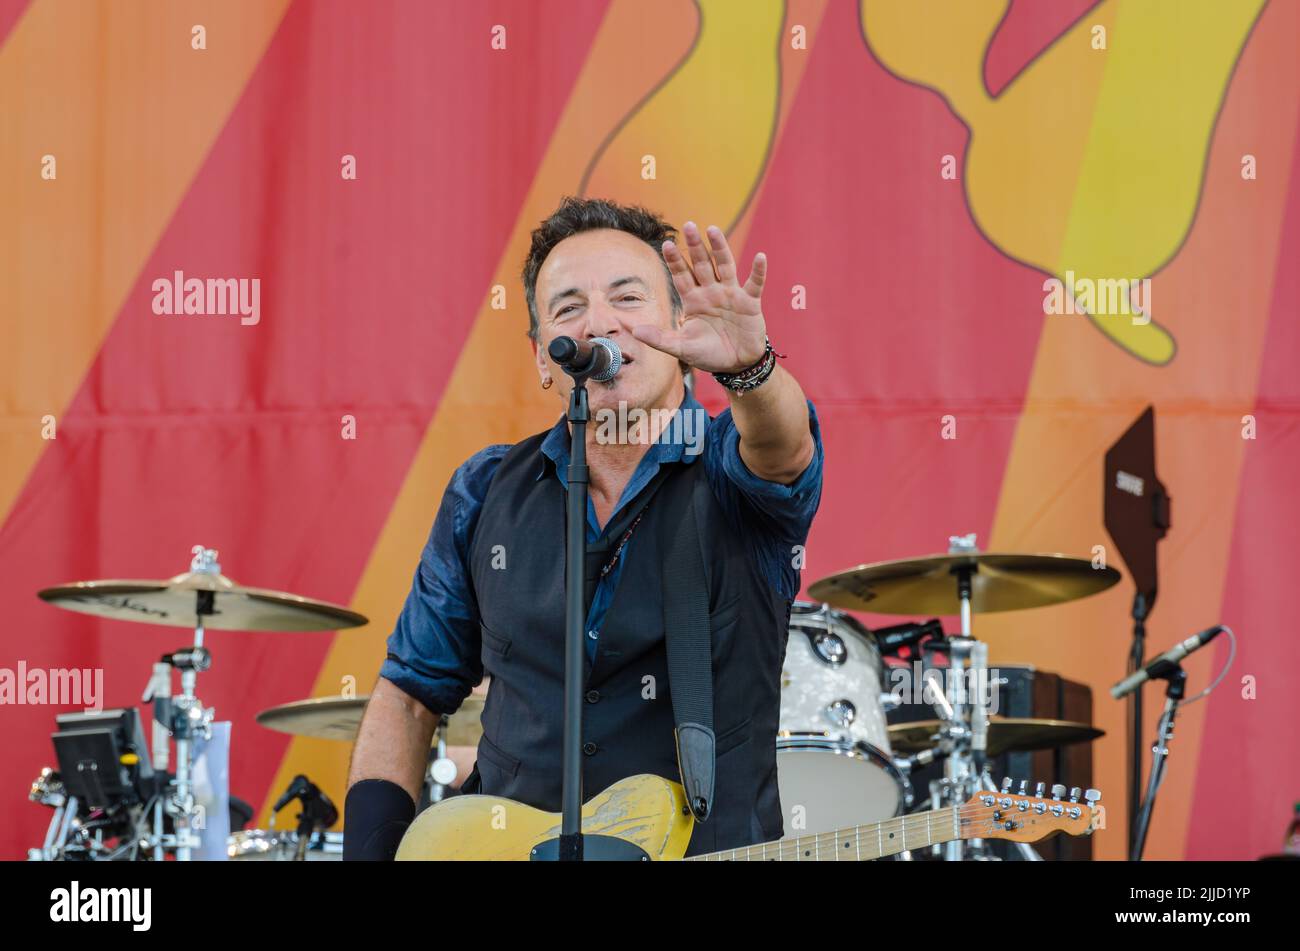 Bruce Springsteen singing at the New Orleans Jazz and Heritage Festival on April 29, 2012 Stock Photo